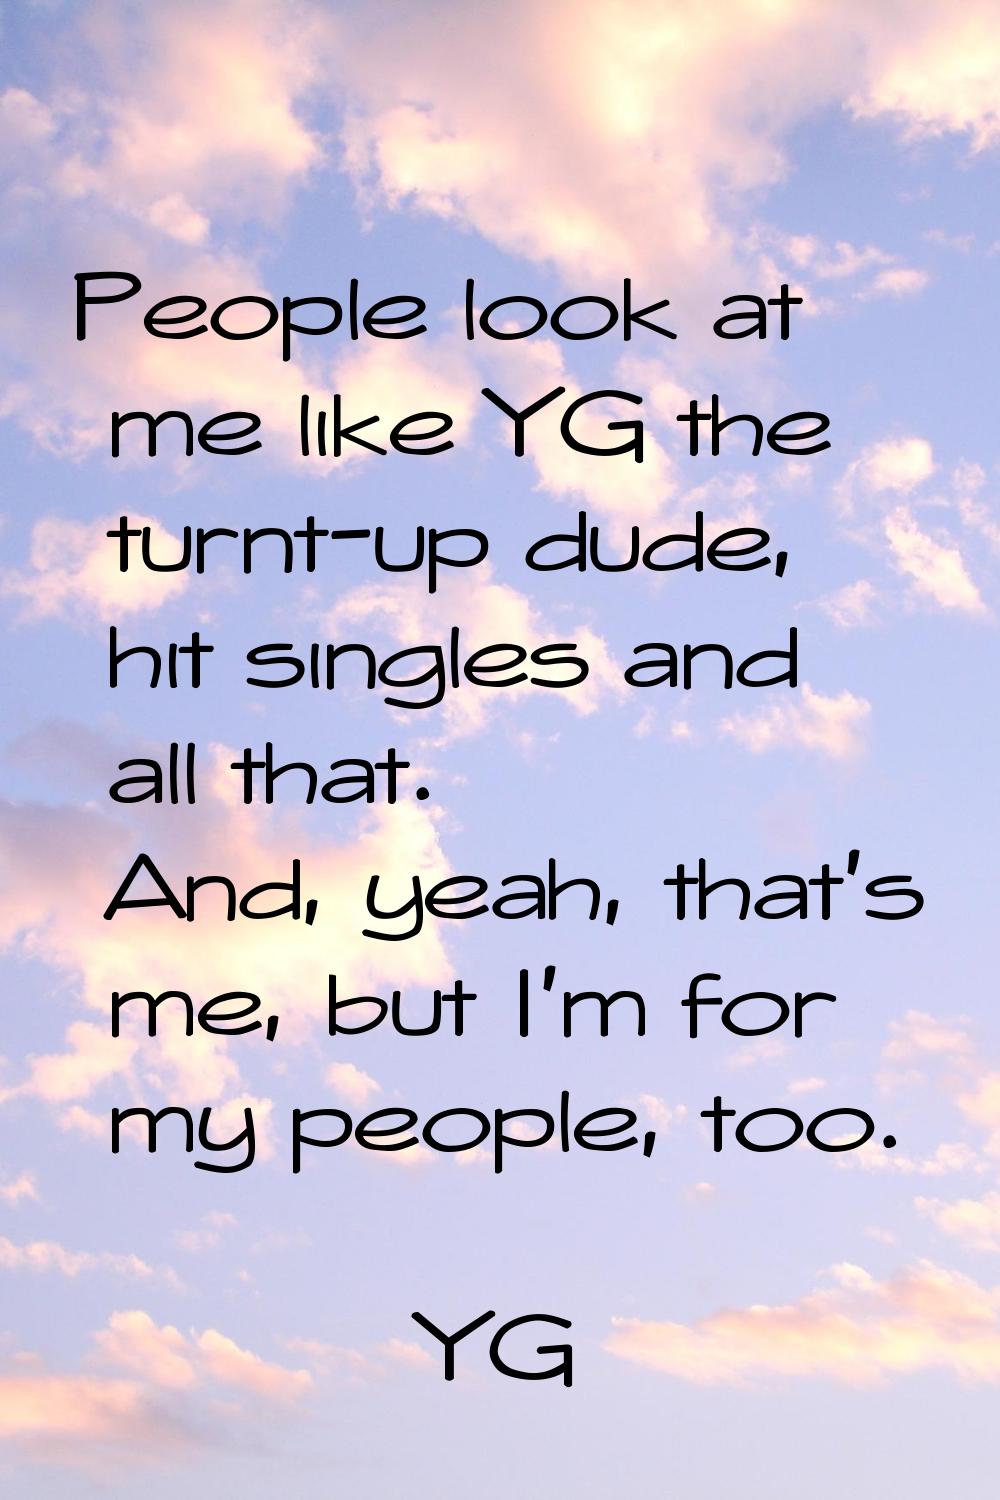 People look at me like YG the turnt-up dude, hit singles and all that. And, yeah, that's me, but I'